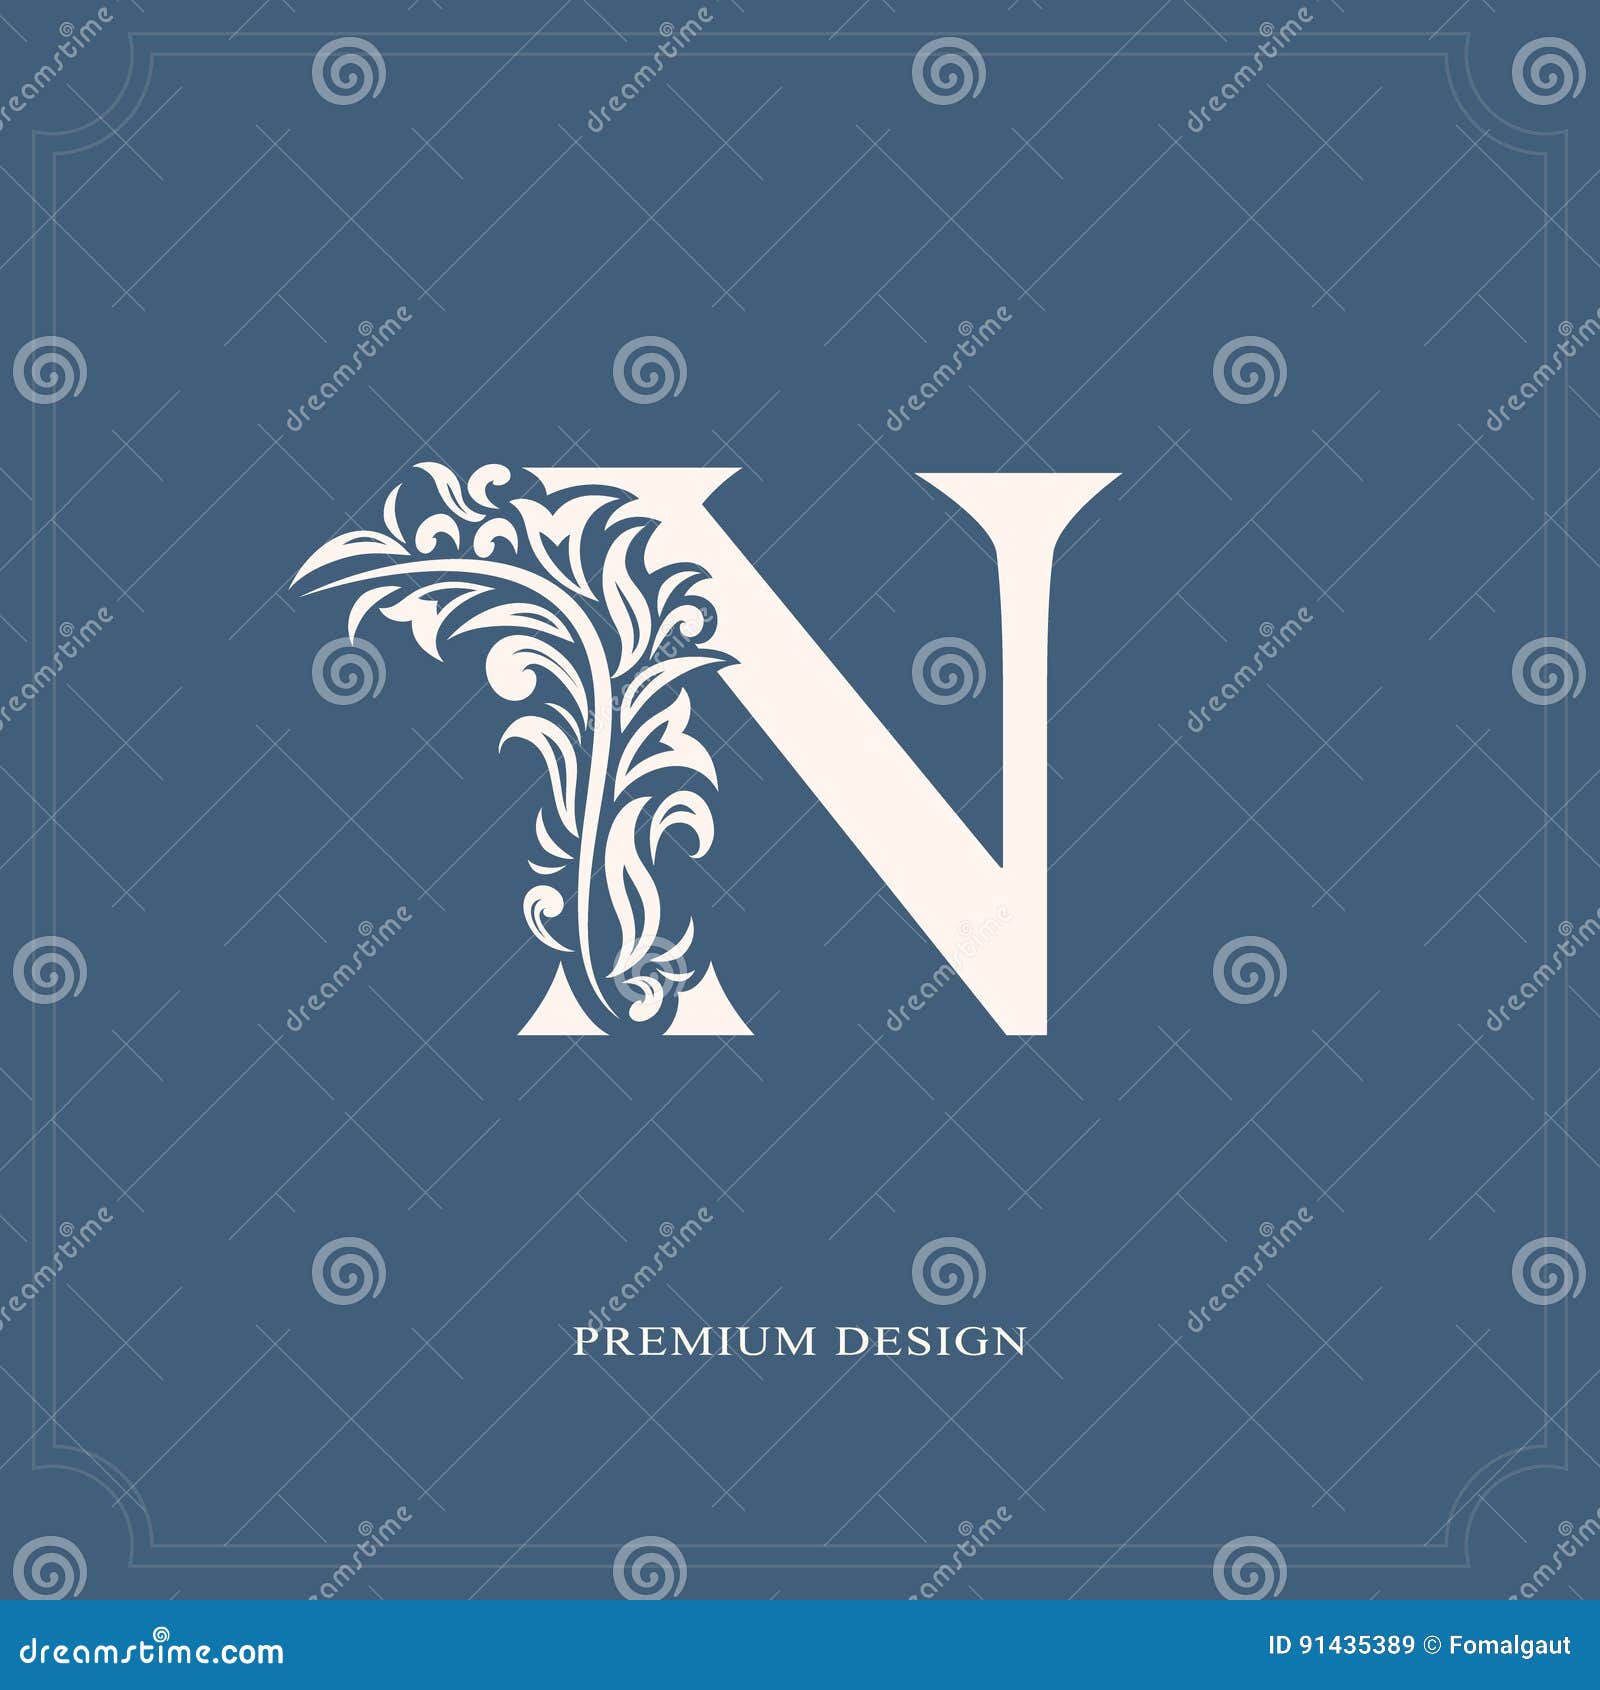 130 Letter N Tattoo Stock Photos Pictures  RoyaltyFree Images  iStock